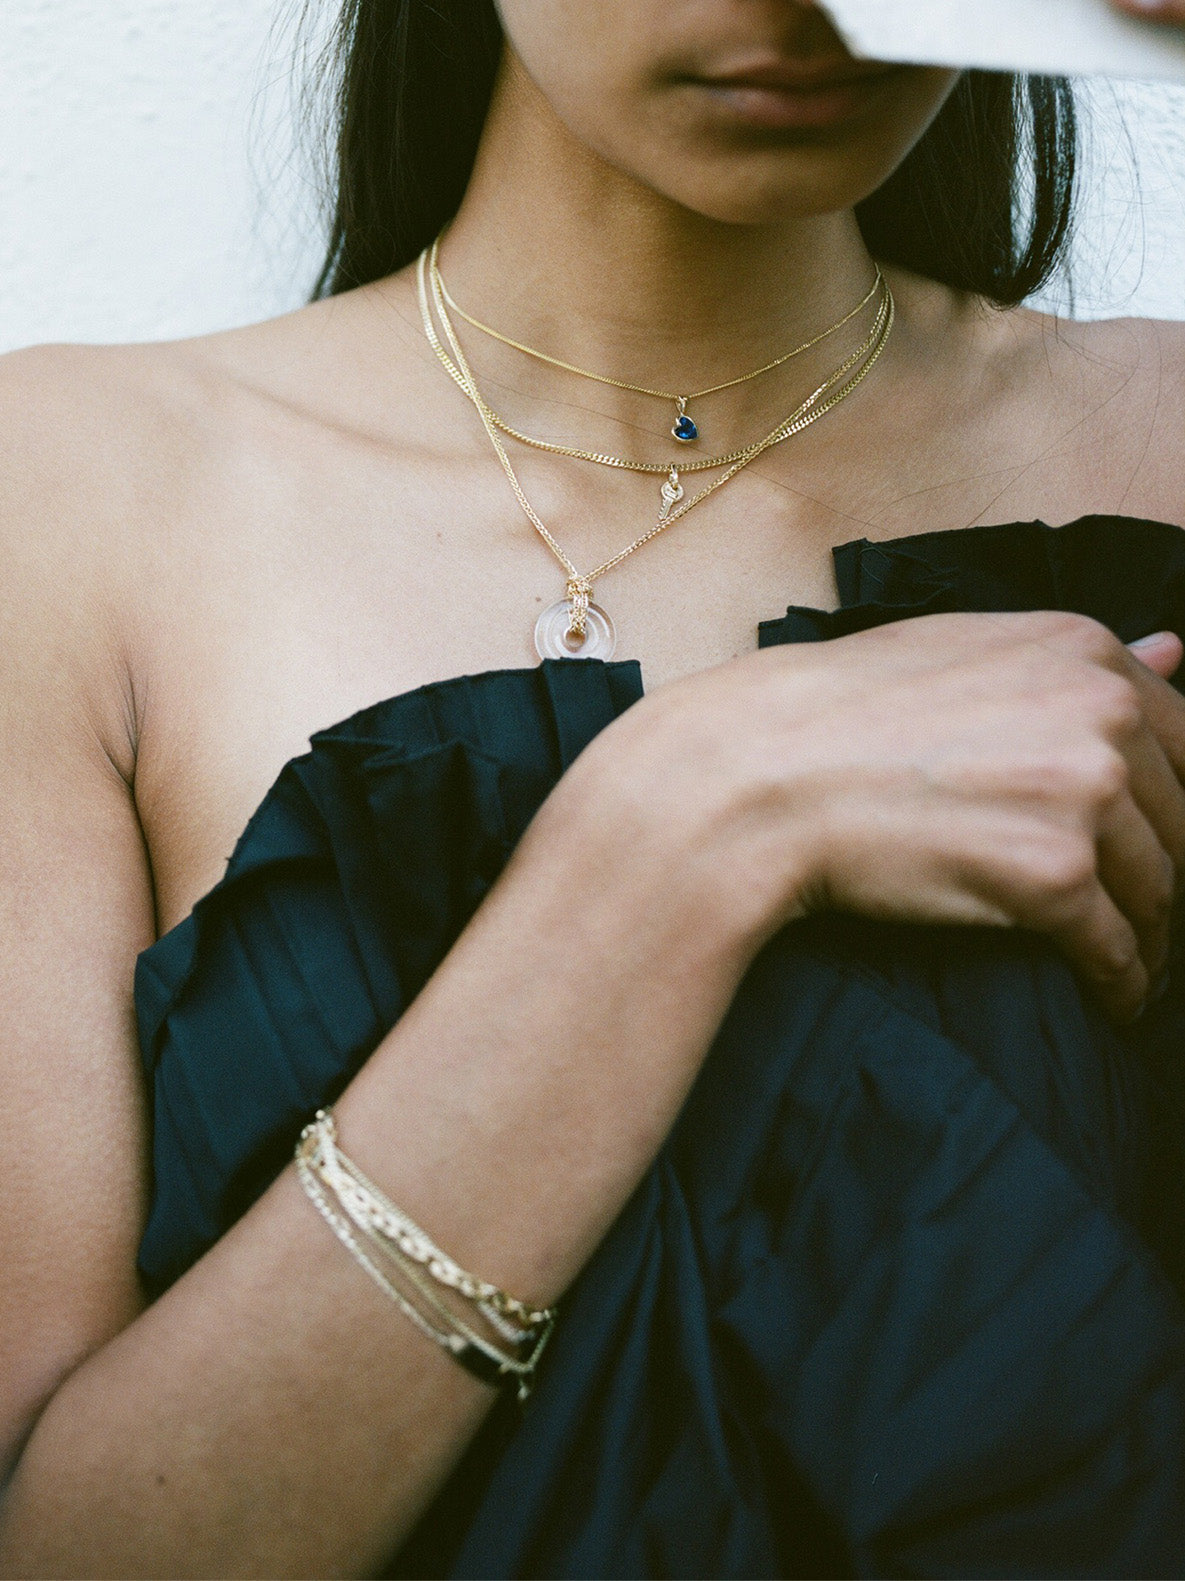 14Kt Yellow Gold Square Wheat Chain & Quartz Pendant Necklace pictured on models neck. Chain knotted through clear quartz donut. 